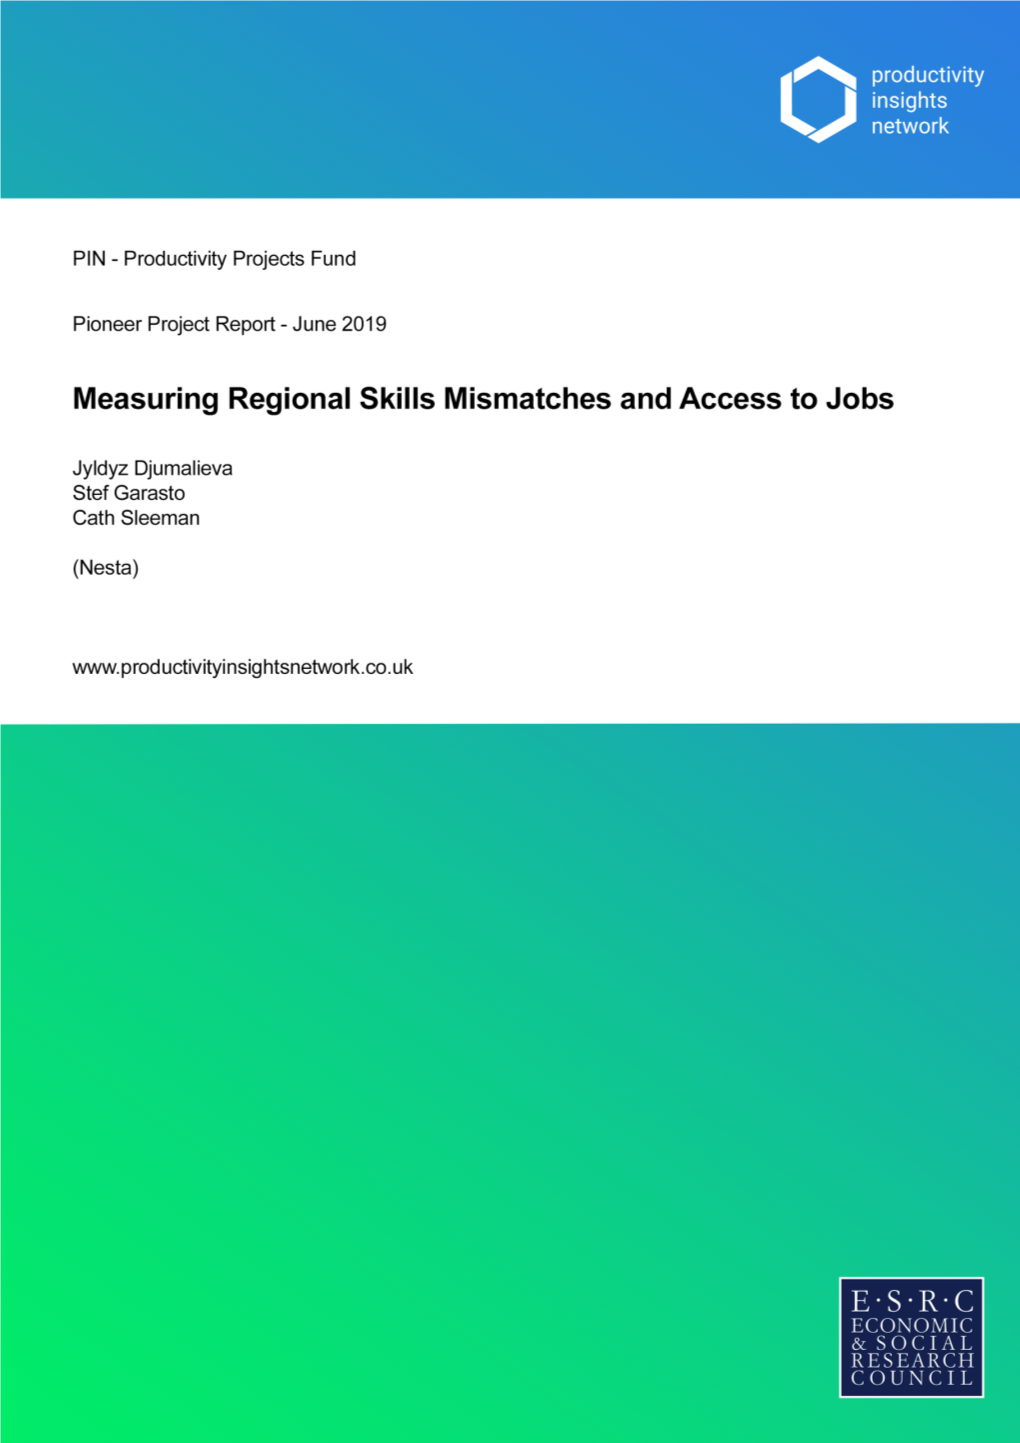 Report/Paper Title: Measuring Regional Skill Mismatches and Access to Jobs